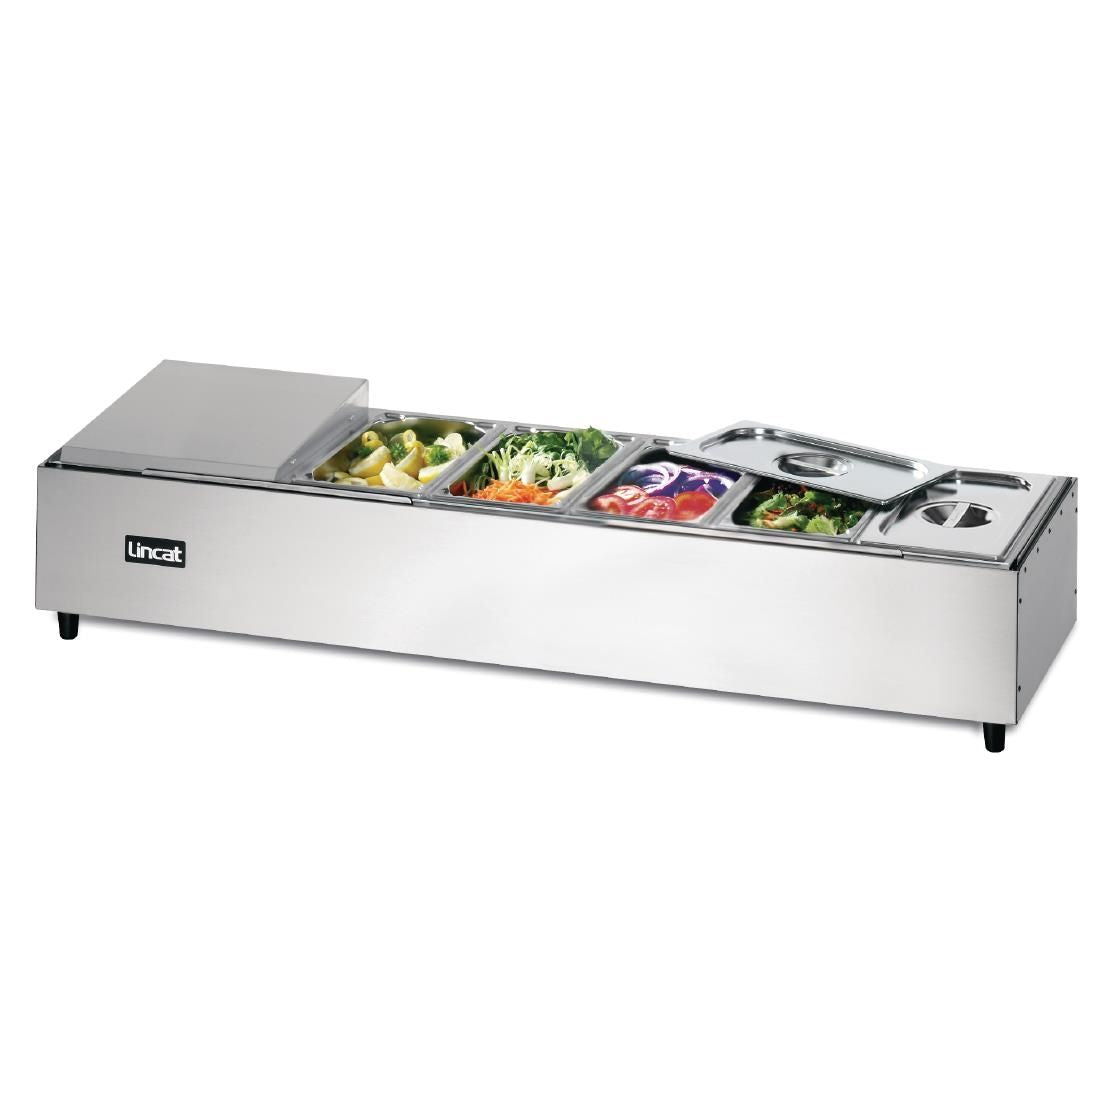 FPB5 - Lincat Seal Counter-top Food Preparation Bar - Refrigerated - W 1225 mm - 0.175 kW JD Catering Equipment Solutions Ltd